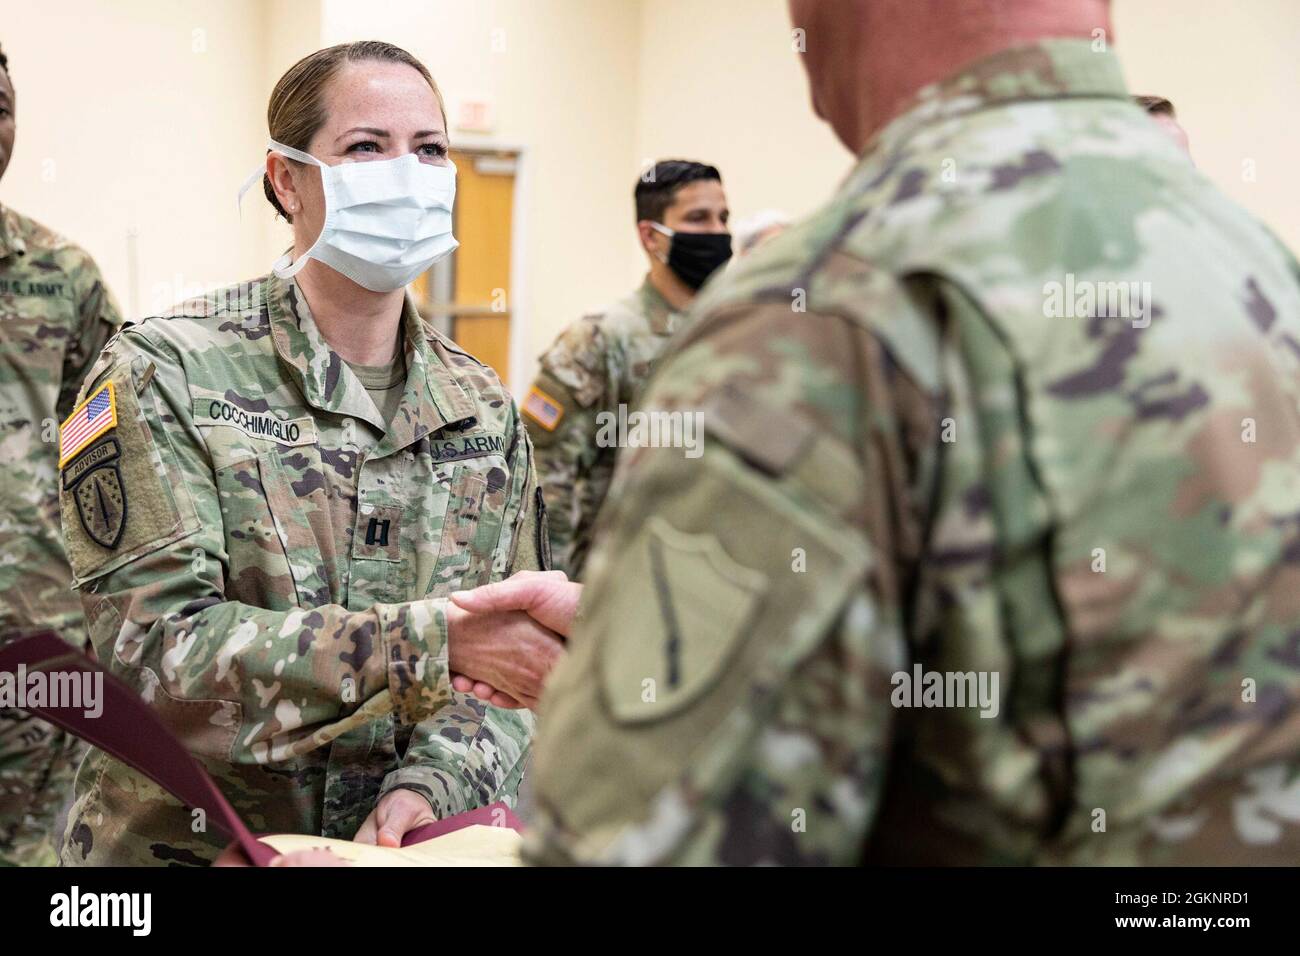 U.S. Army Brig. Gen. Robert J. Larkin, adjutant general of the Kentucky National Guard, presents a Kentucky Commendation Medal to U.S. Army Capt. Stefanie Cocchimiglio, a registered nurse at the Community Vaccination Center at the Henderson County Cooperative Extension Service in Henderson, Kentucky, June 8, 2021. U.S. Northern Command, through U.S. Army North, remains committed to providing continued, flexible Department of Defense Support to the Federal Emergency Management Agency as part of the whole-of-government response to COVID-19. Stock Photo